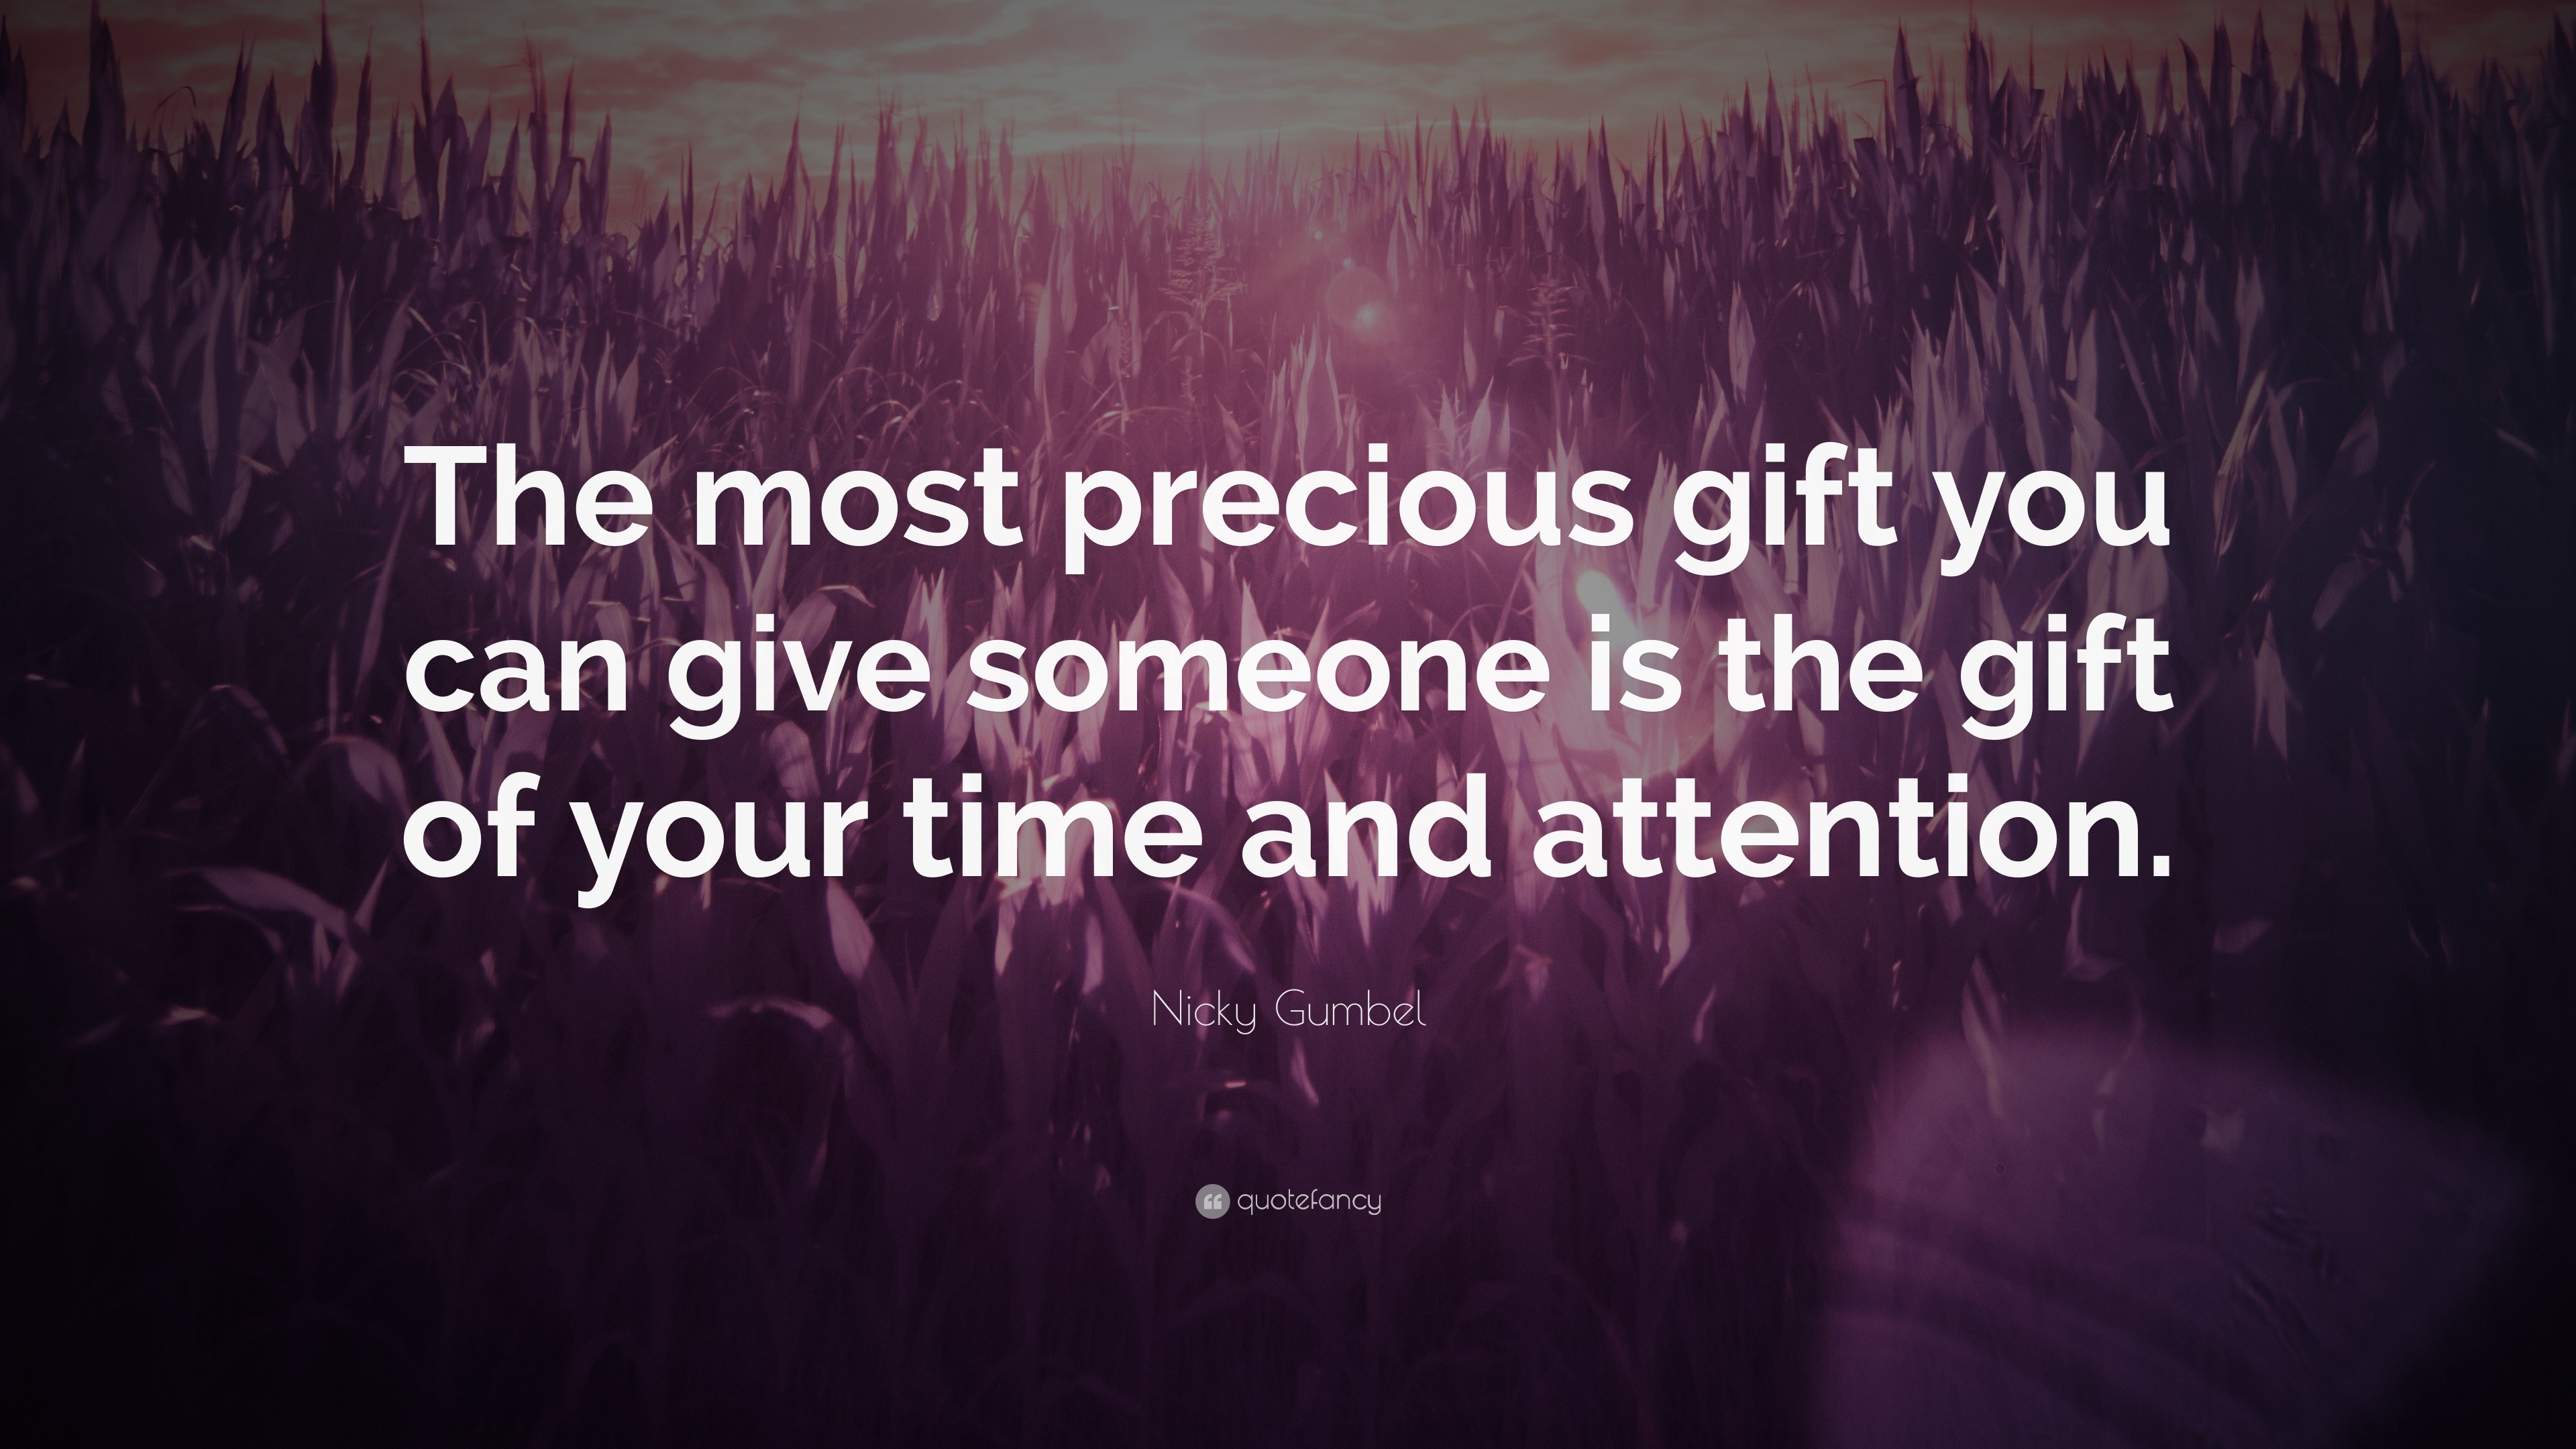 1188729 Nicky Gumbel Quote The most precious gift you can give someone is